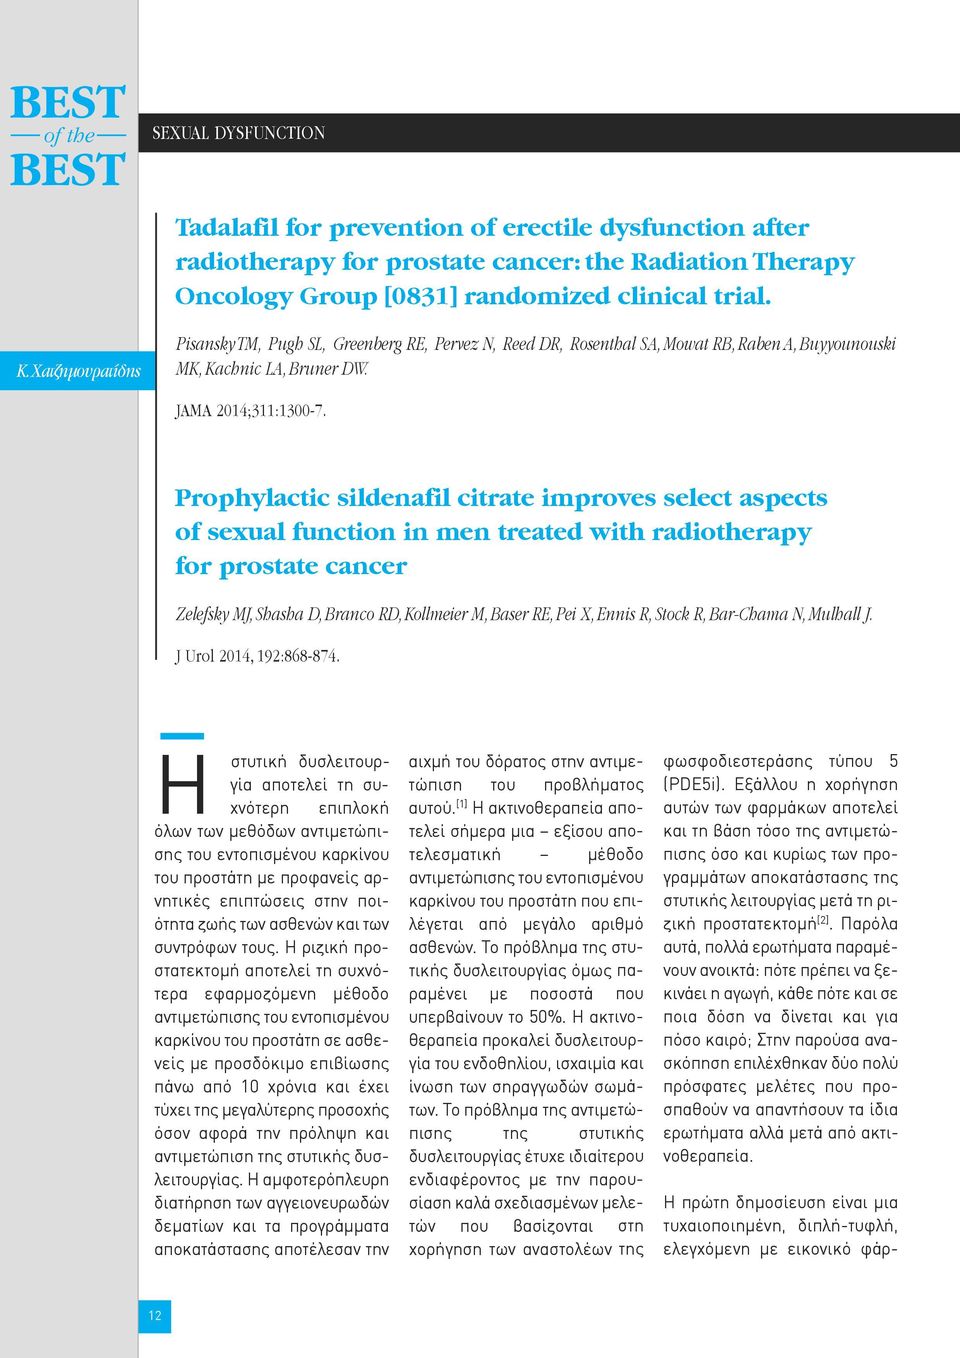 Prophylactic sildenafil citrate improves select aspects of sexual function in men treated with radiotherapy for prostate cancer Zelefsky MJ, Shasha D, Branco RD, Kollmeier M, Baser RE, Pei X, Ennis